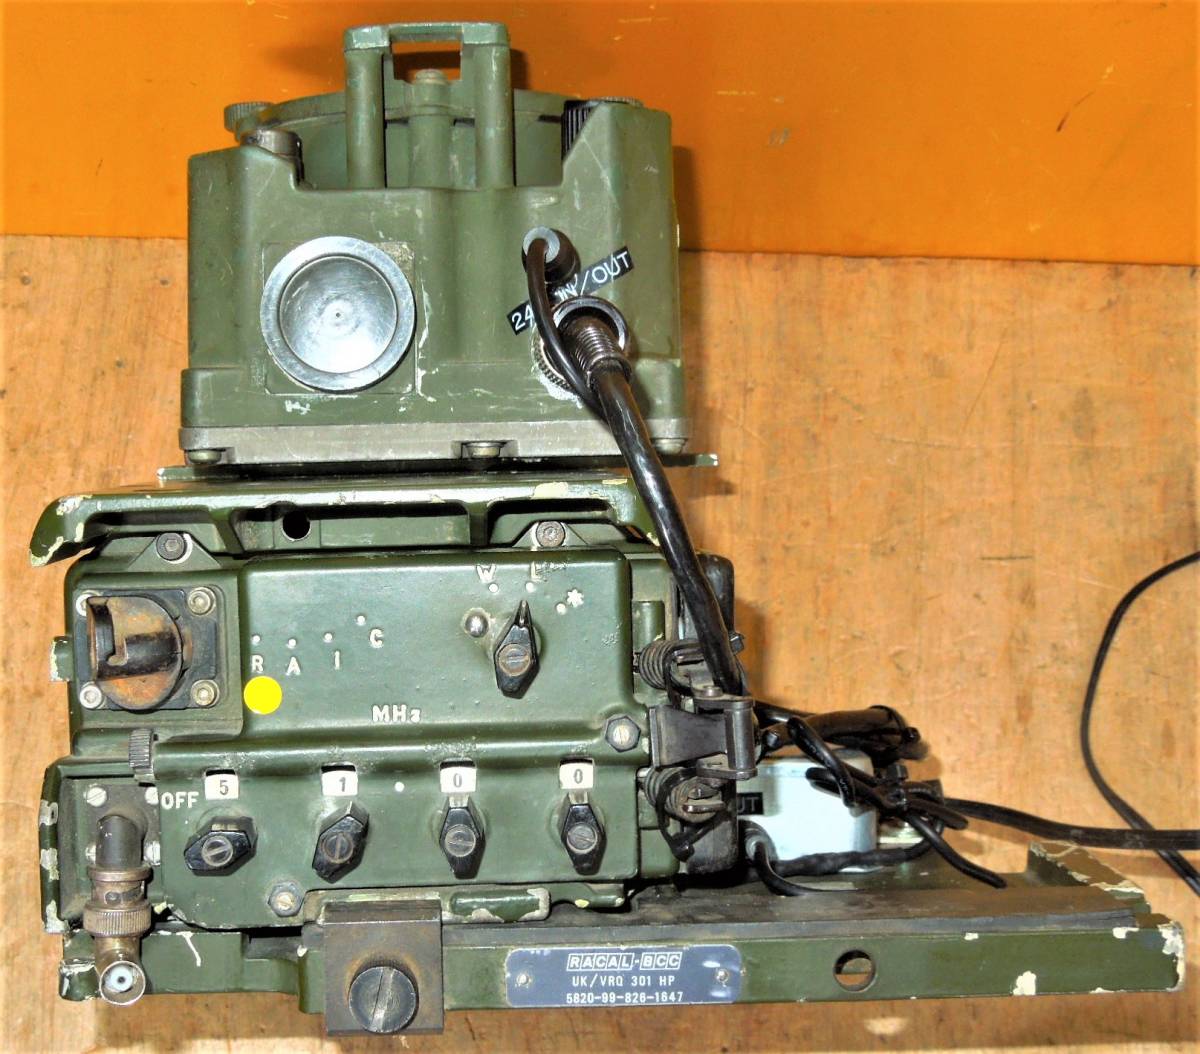  britain army RT-351. the US armed forces. LS-671. combination .,30.000-76.975MHz 4WFM sending receiver 